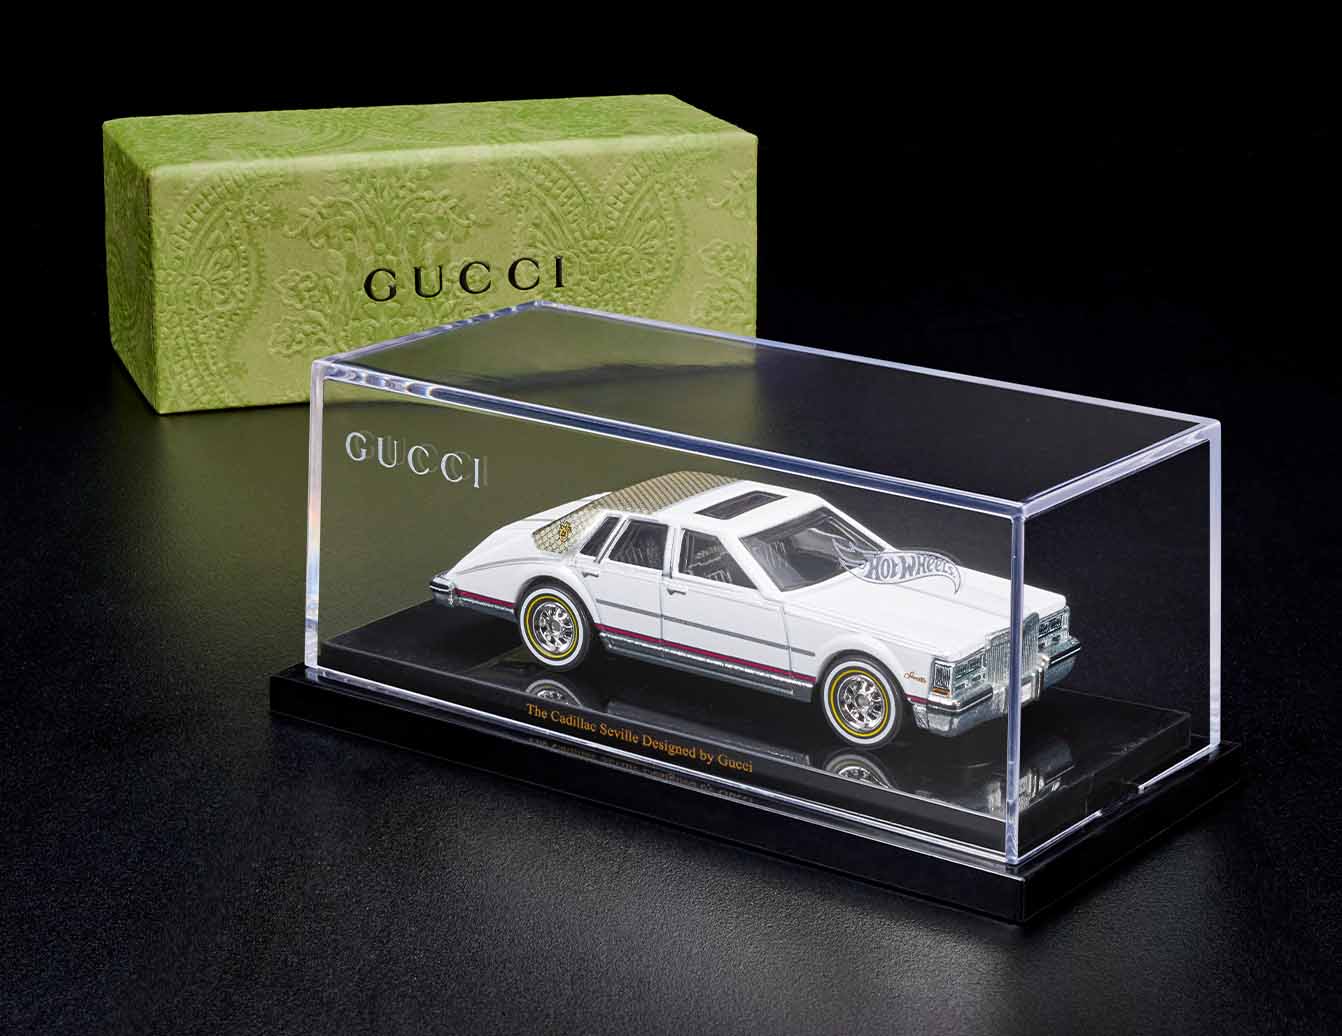 Gucci-Teams-with-Mattel-for-Hot-Wheels-news